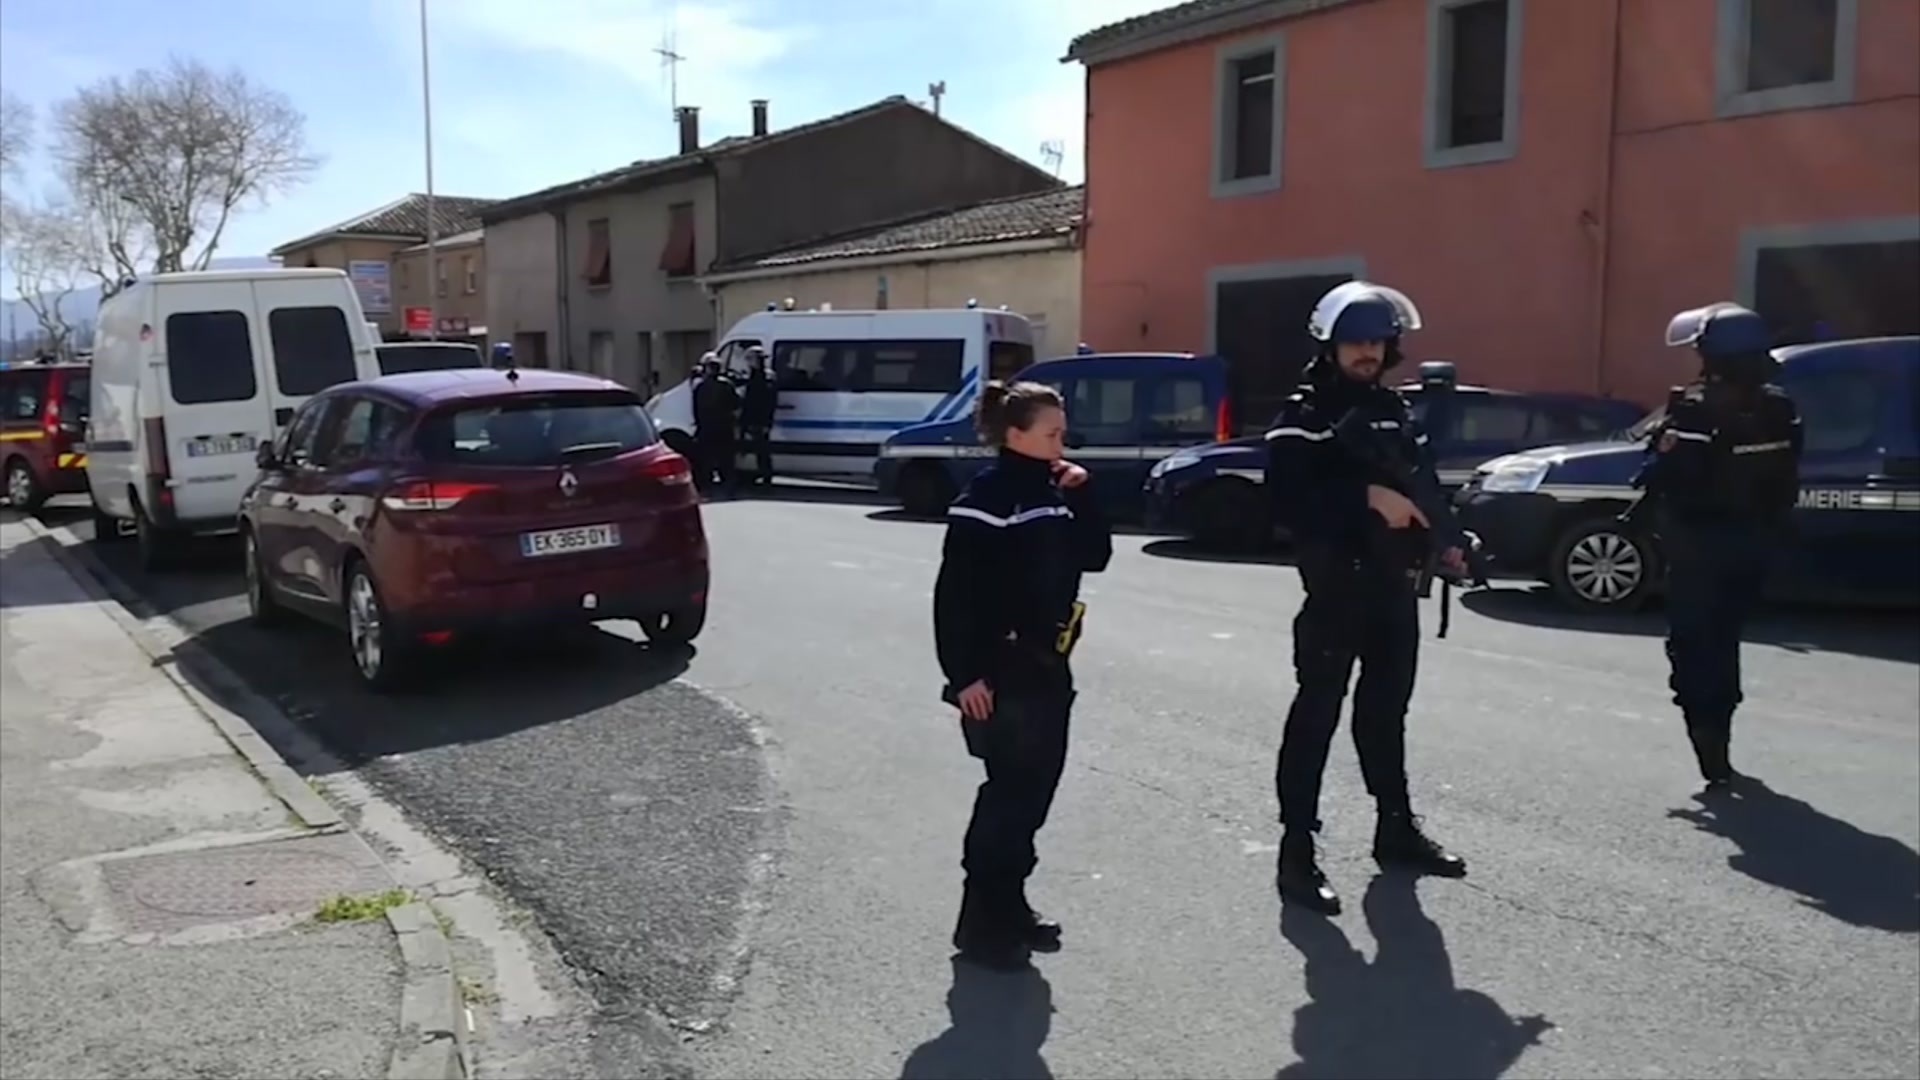 French counterterrorism prosecutors are taking charge of the investigation into the shooting of a police officer in southern France that has led to an apparent hostage-taking at a supermarket. (La Depeche Du Midi via AP)